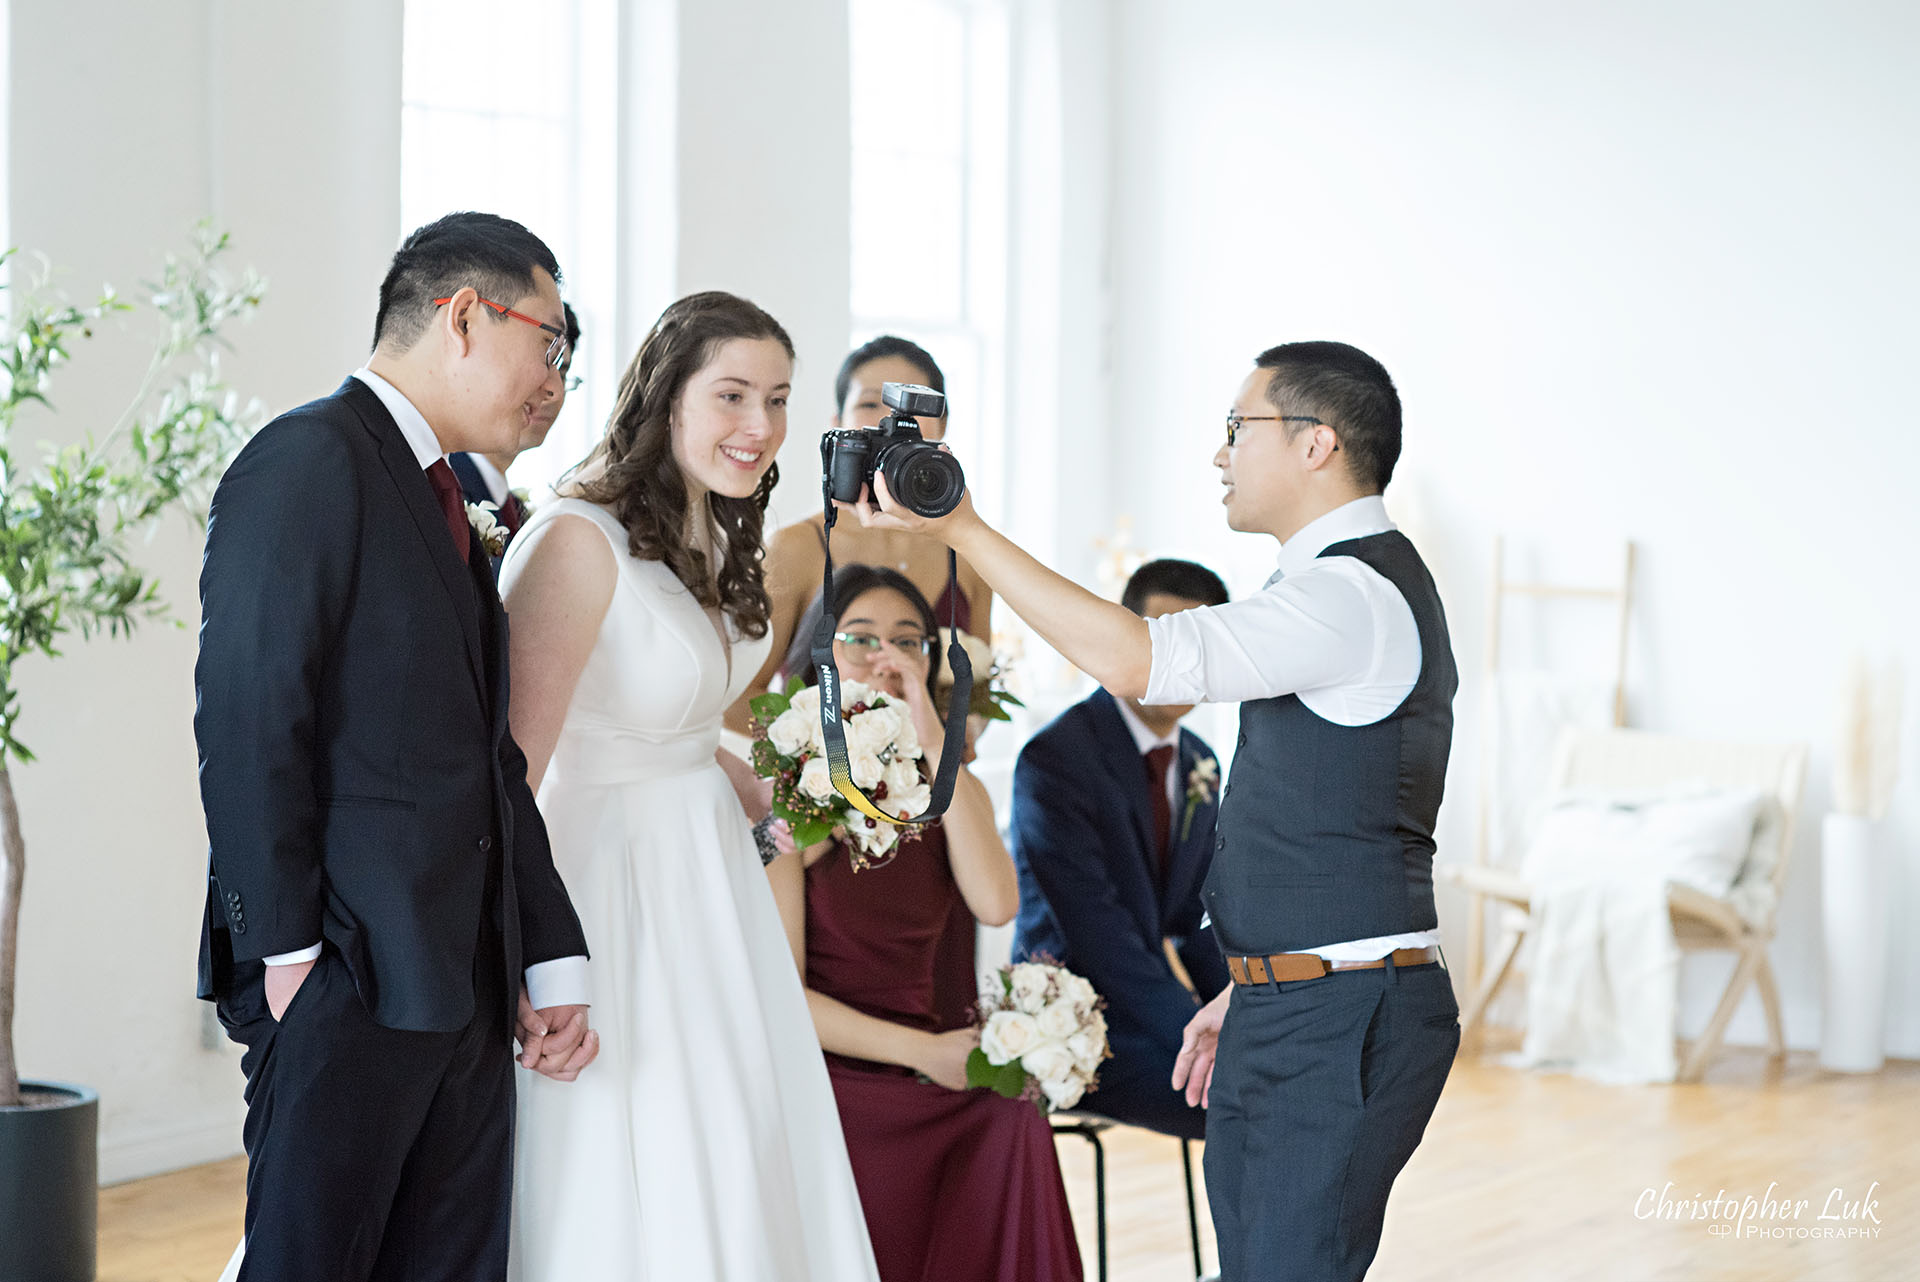 Toronto Wedding Photographer Behind the Scenes Bride Groom Reaction Smile Happy Seeing Pictures Images on Camera